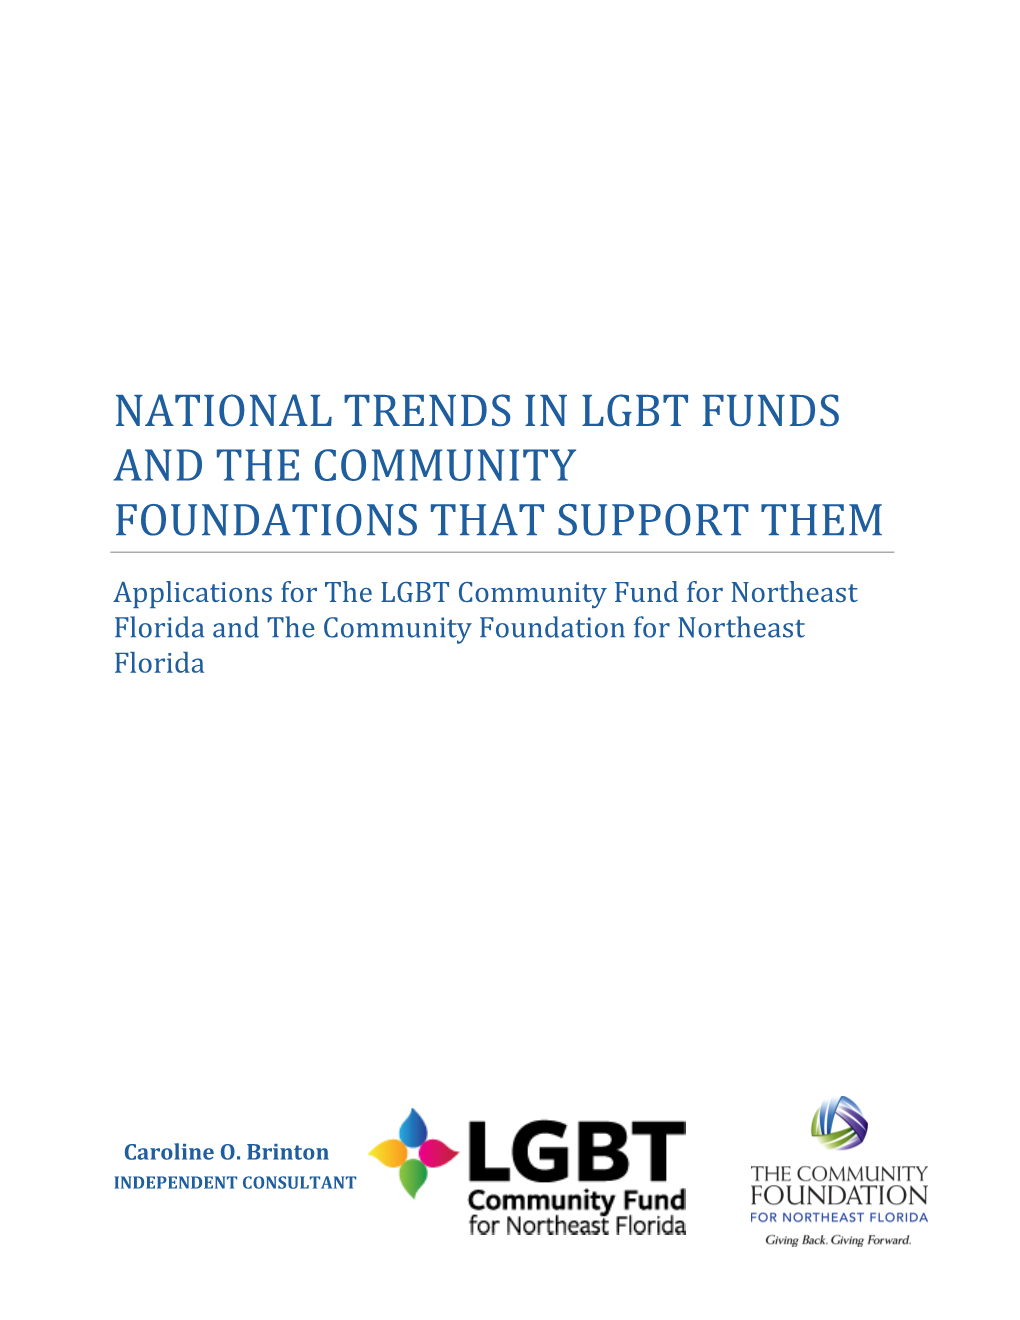 National Trends in Lgbt Funds and the Community Foundations That Support Them